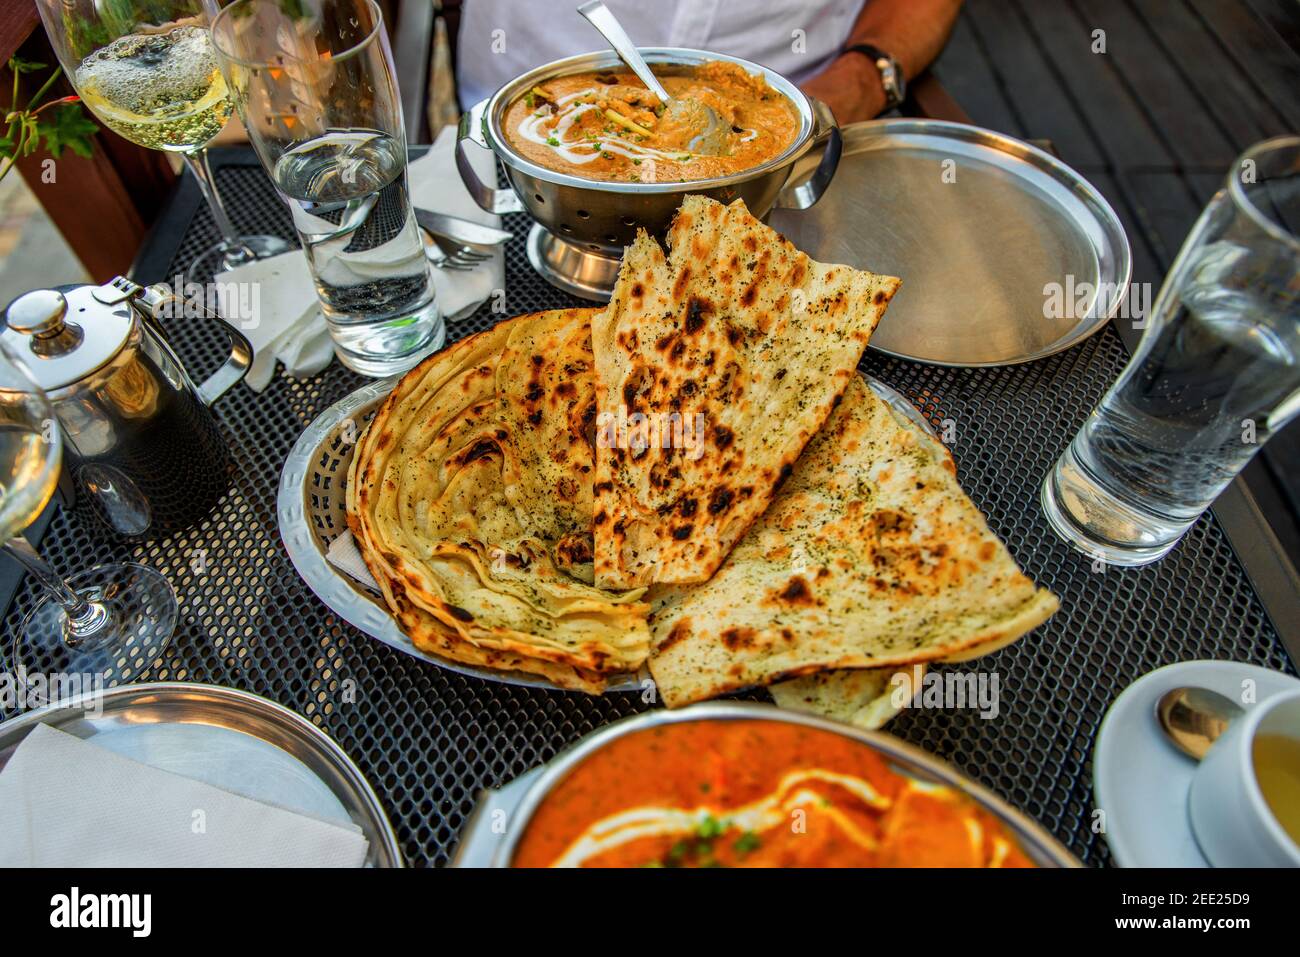 Table rich of indian meals, bread (naan), glasses of water,wine,jug with tea, bowls and plate. Outdoor indian restaurant. Stock Photo